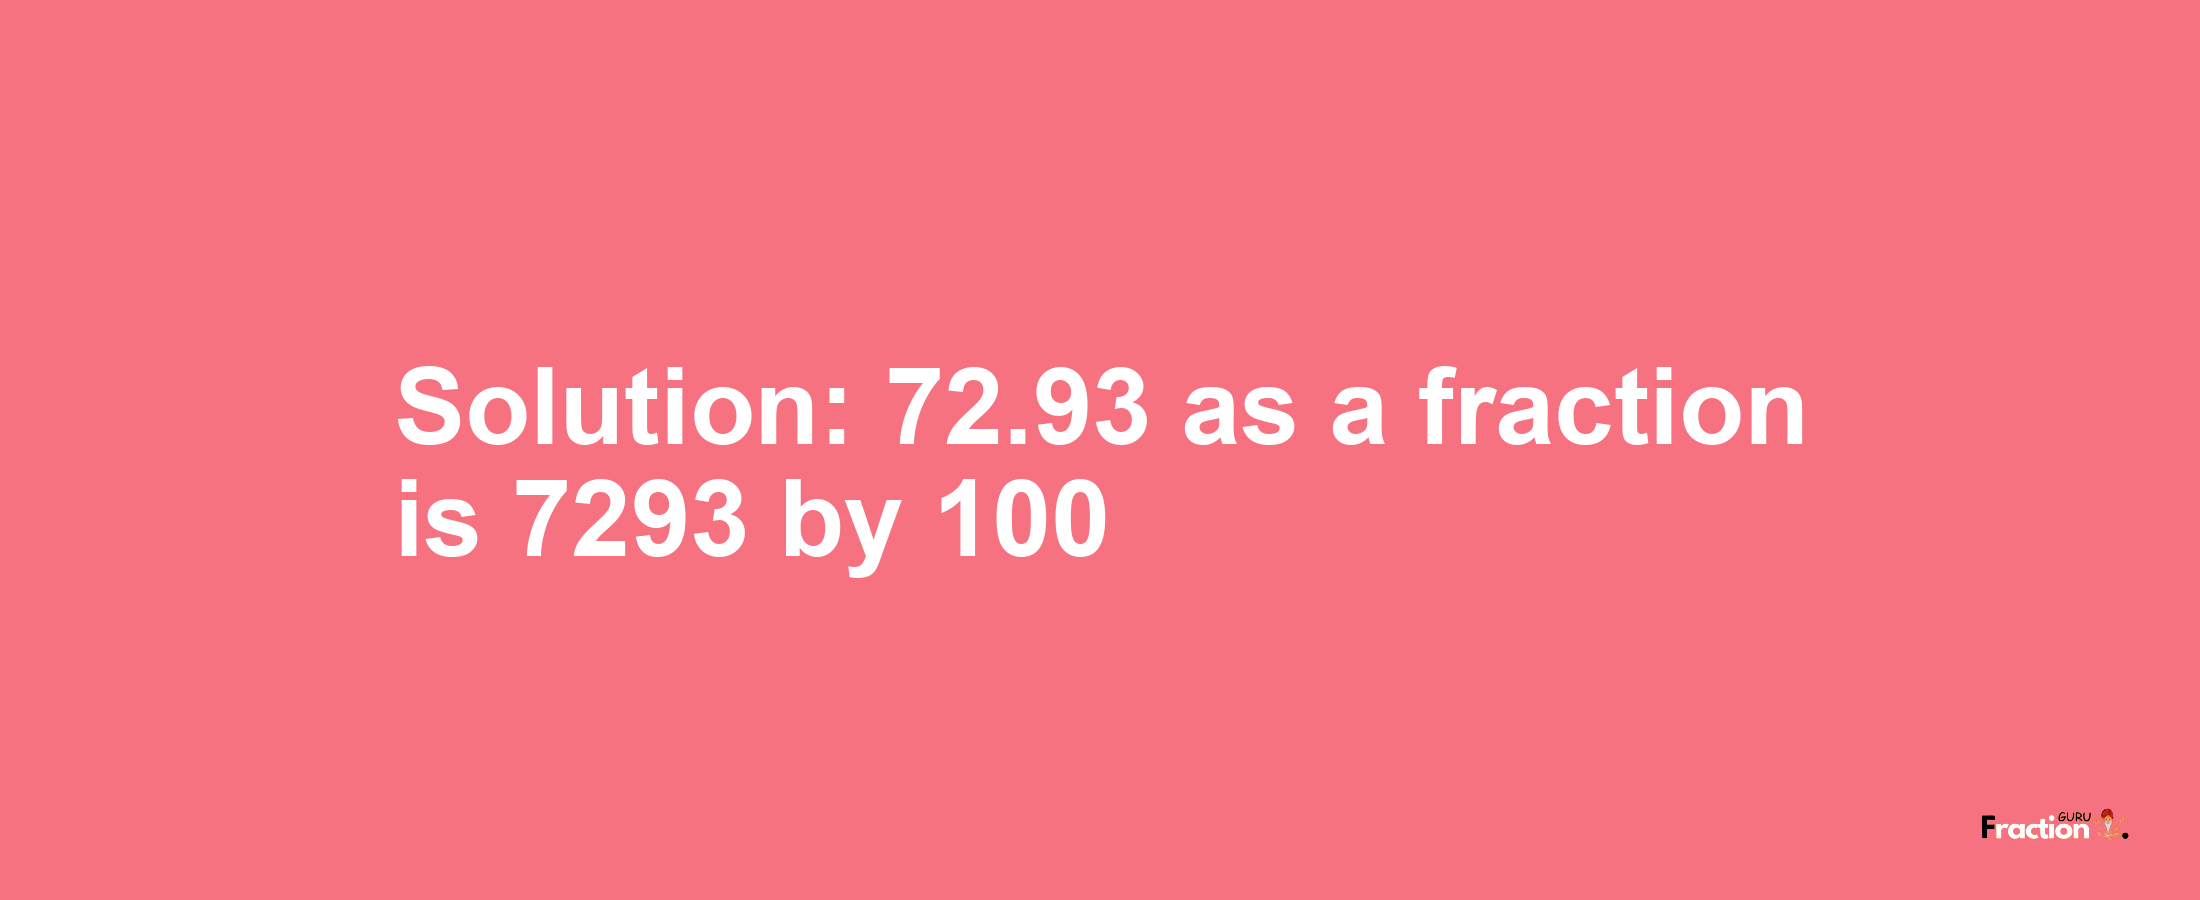 Solution:72.93 as a fraction is 7293/100